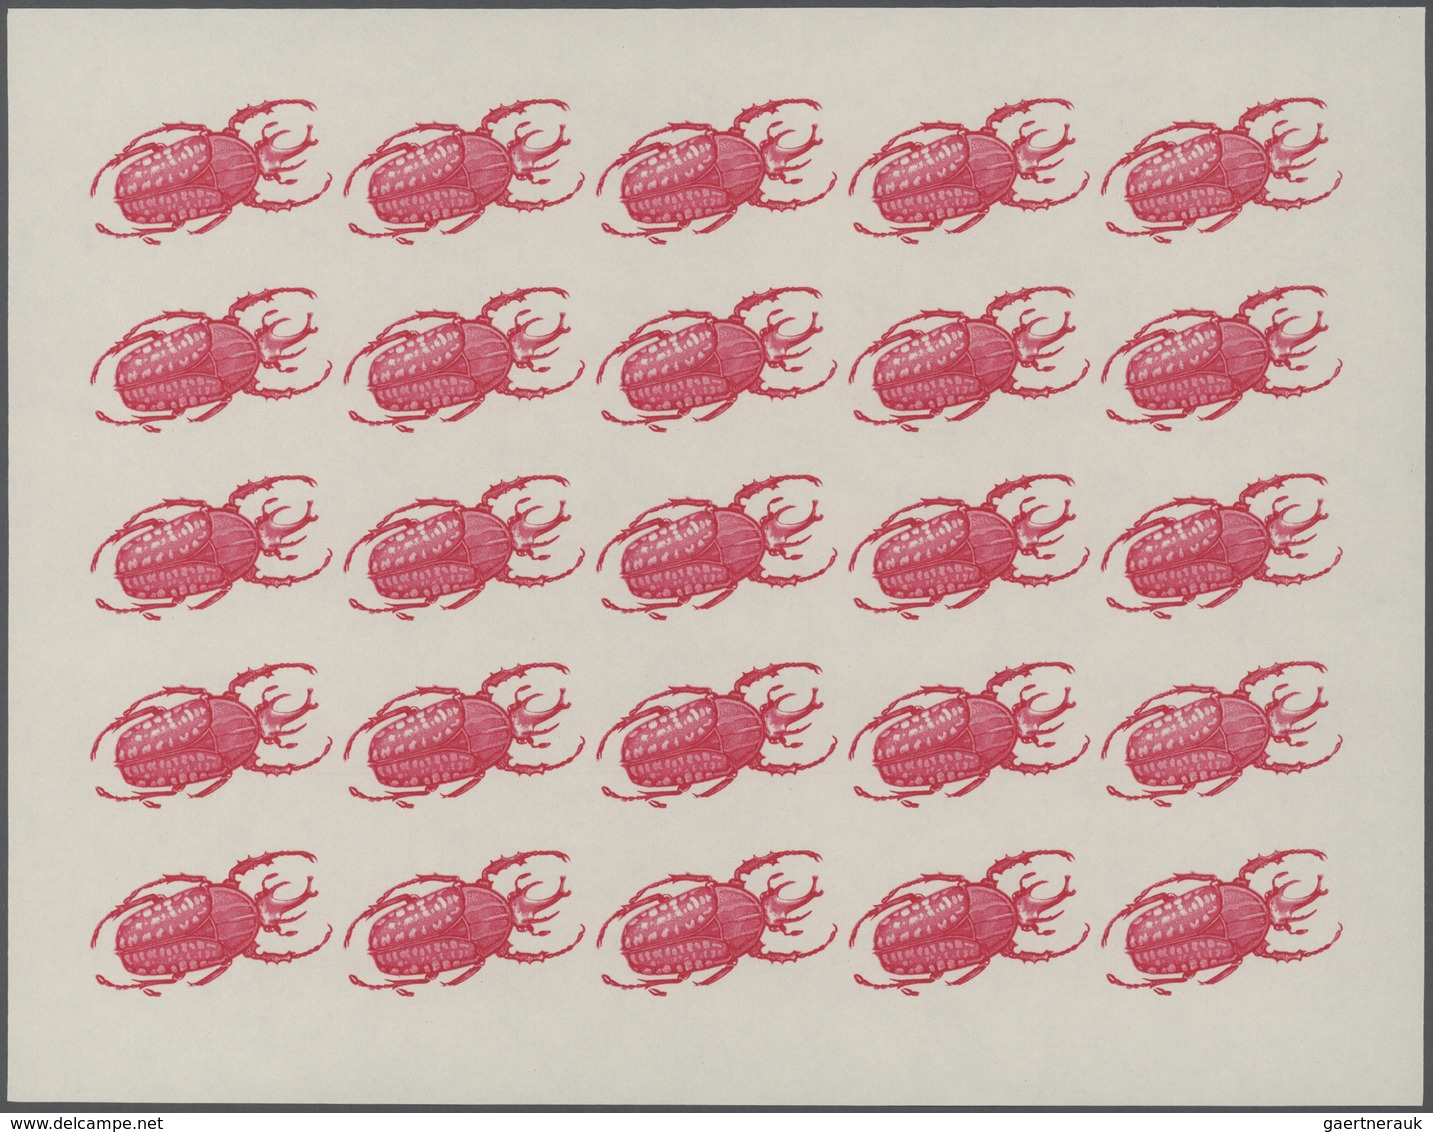 Thematik: Tiere-Insekten / animals-insects: 1970, Burundi. Progressive proofs set of sheets for the